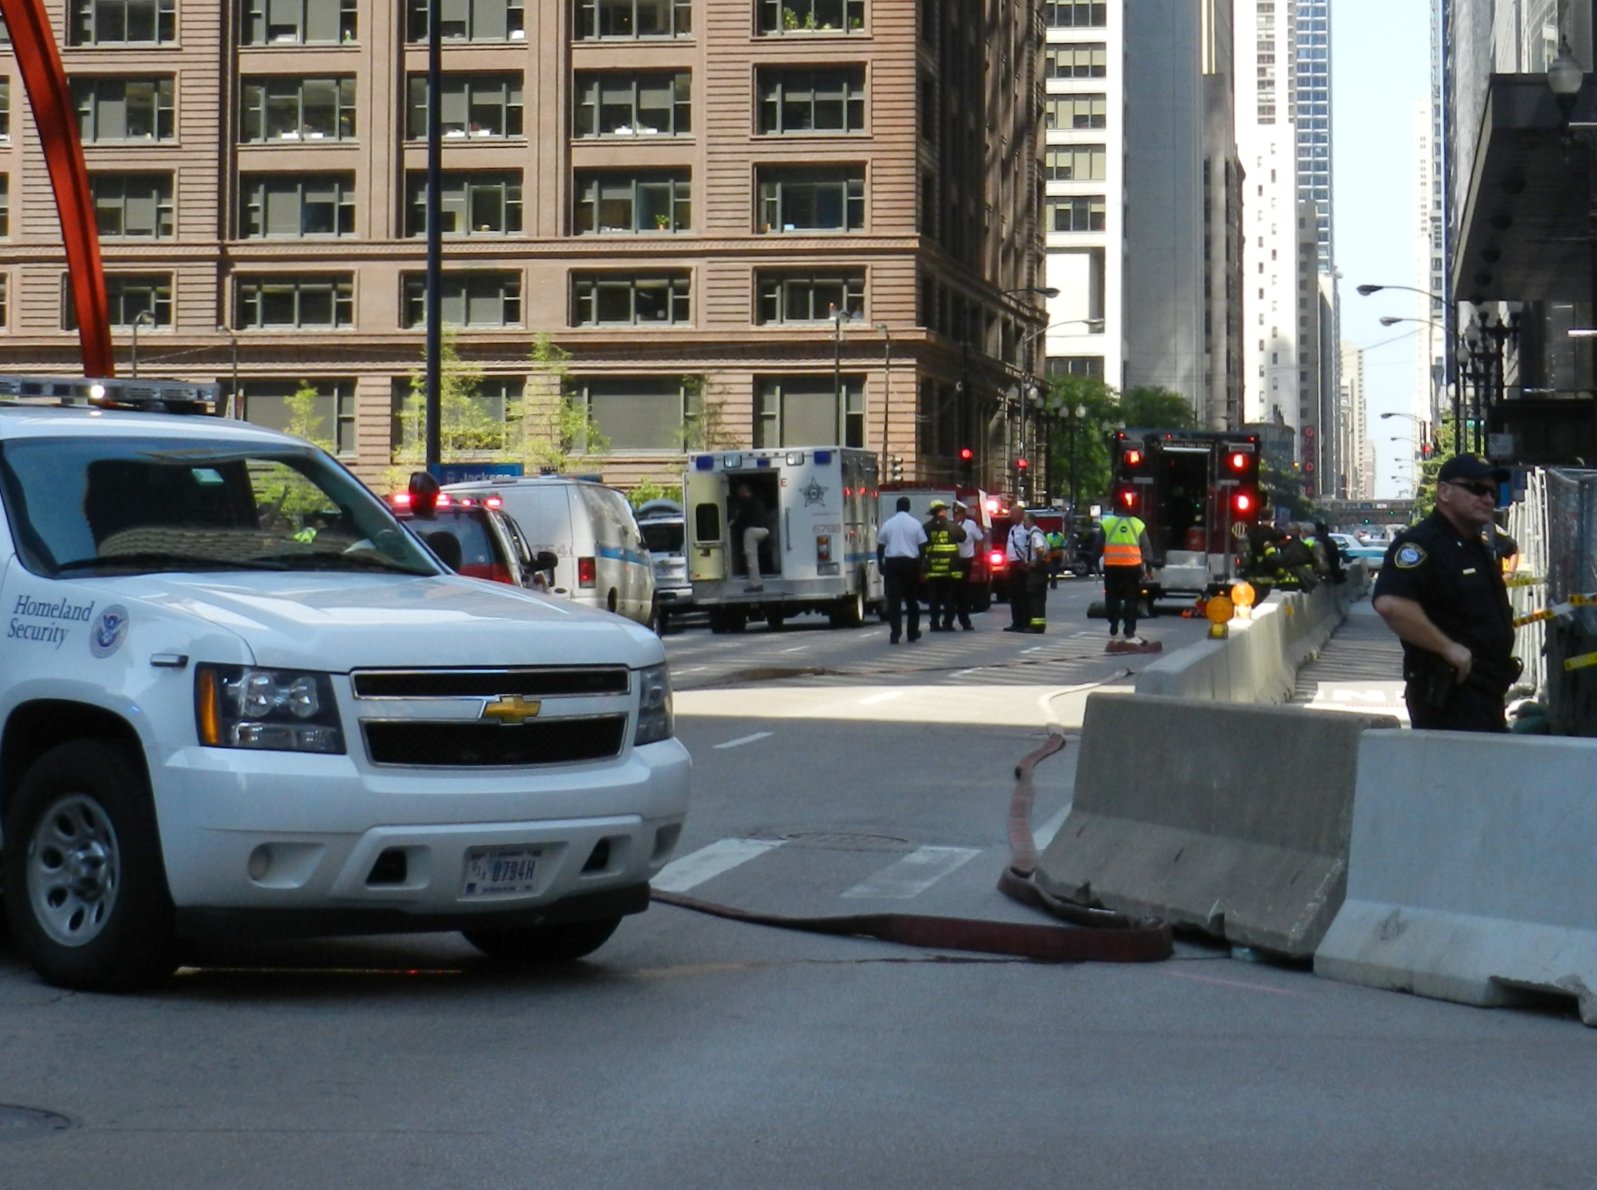 Bomb Threat at Jackson/Dearborn: Chicago Police, Chicago Fire Department, Homeland Security Respond